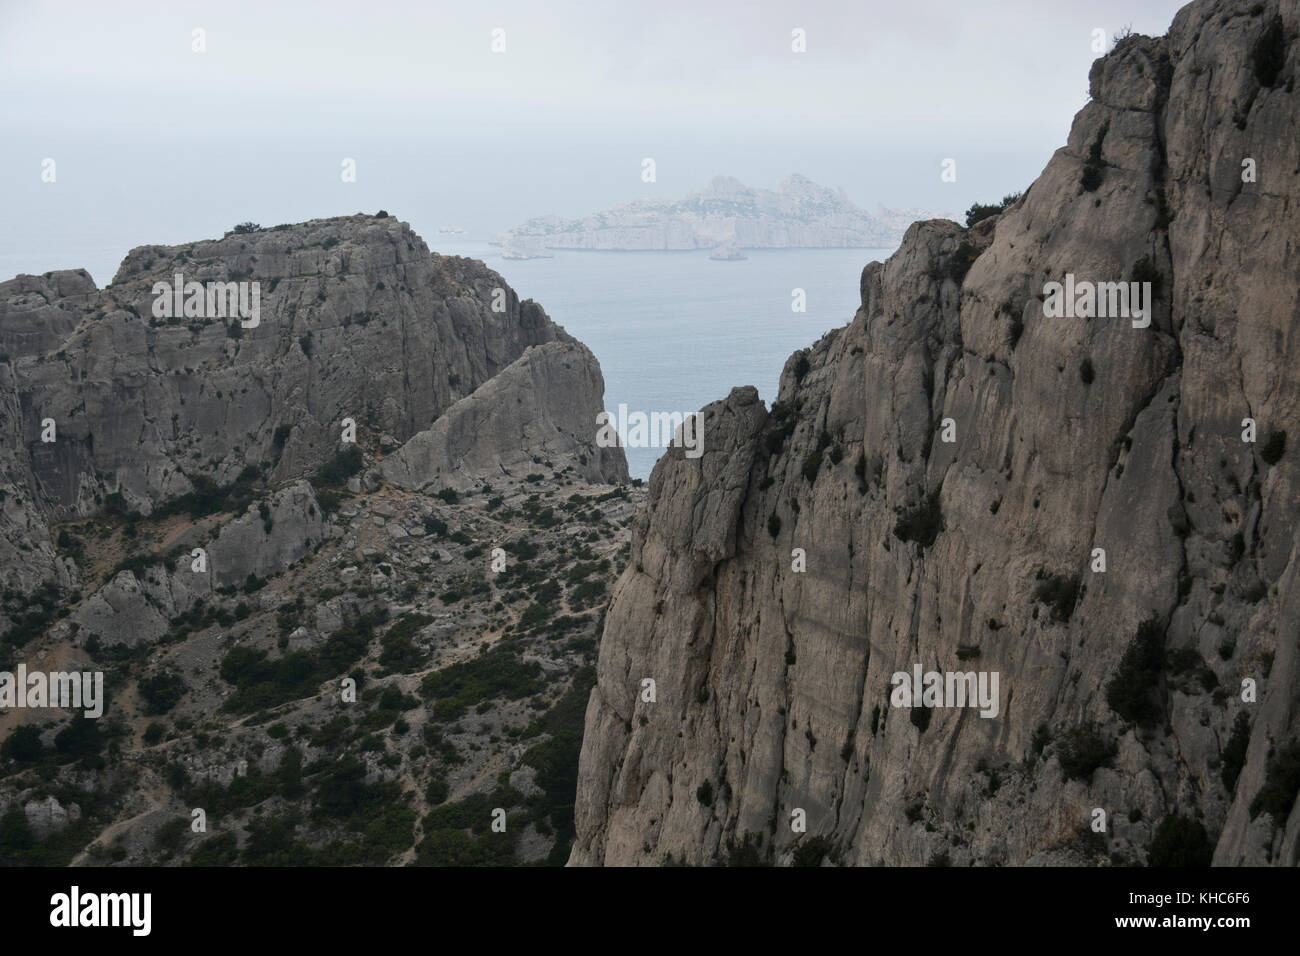 View from Cap Gros in Calanques *** Local Caption *** France, Sud, Provence, Calanques, National Park, cliffs, rocks, view, Cap Gros, sea, Mediterrane Stock Photo